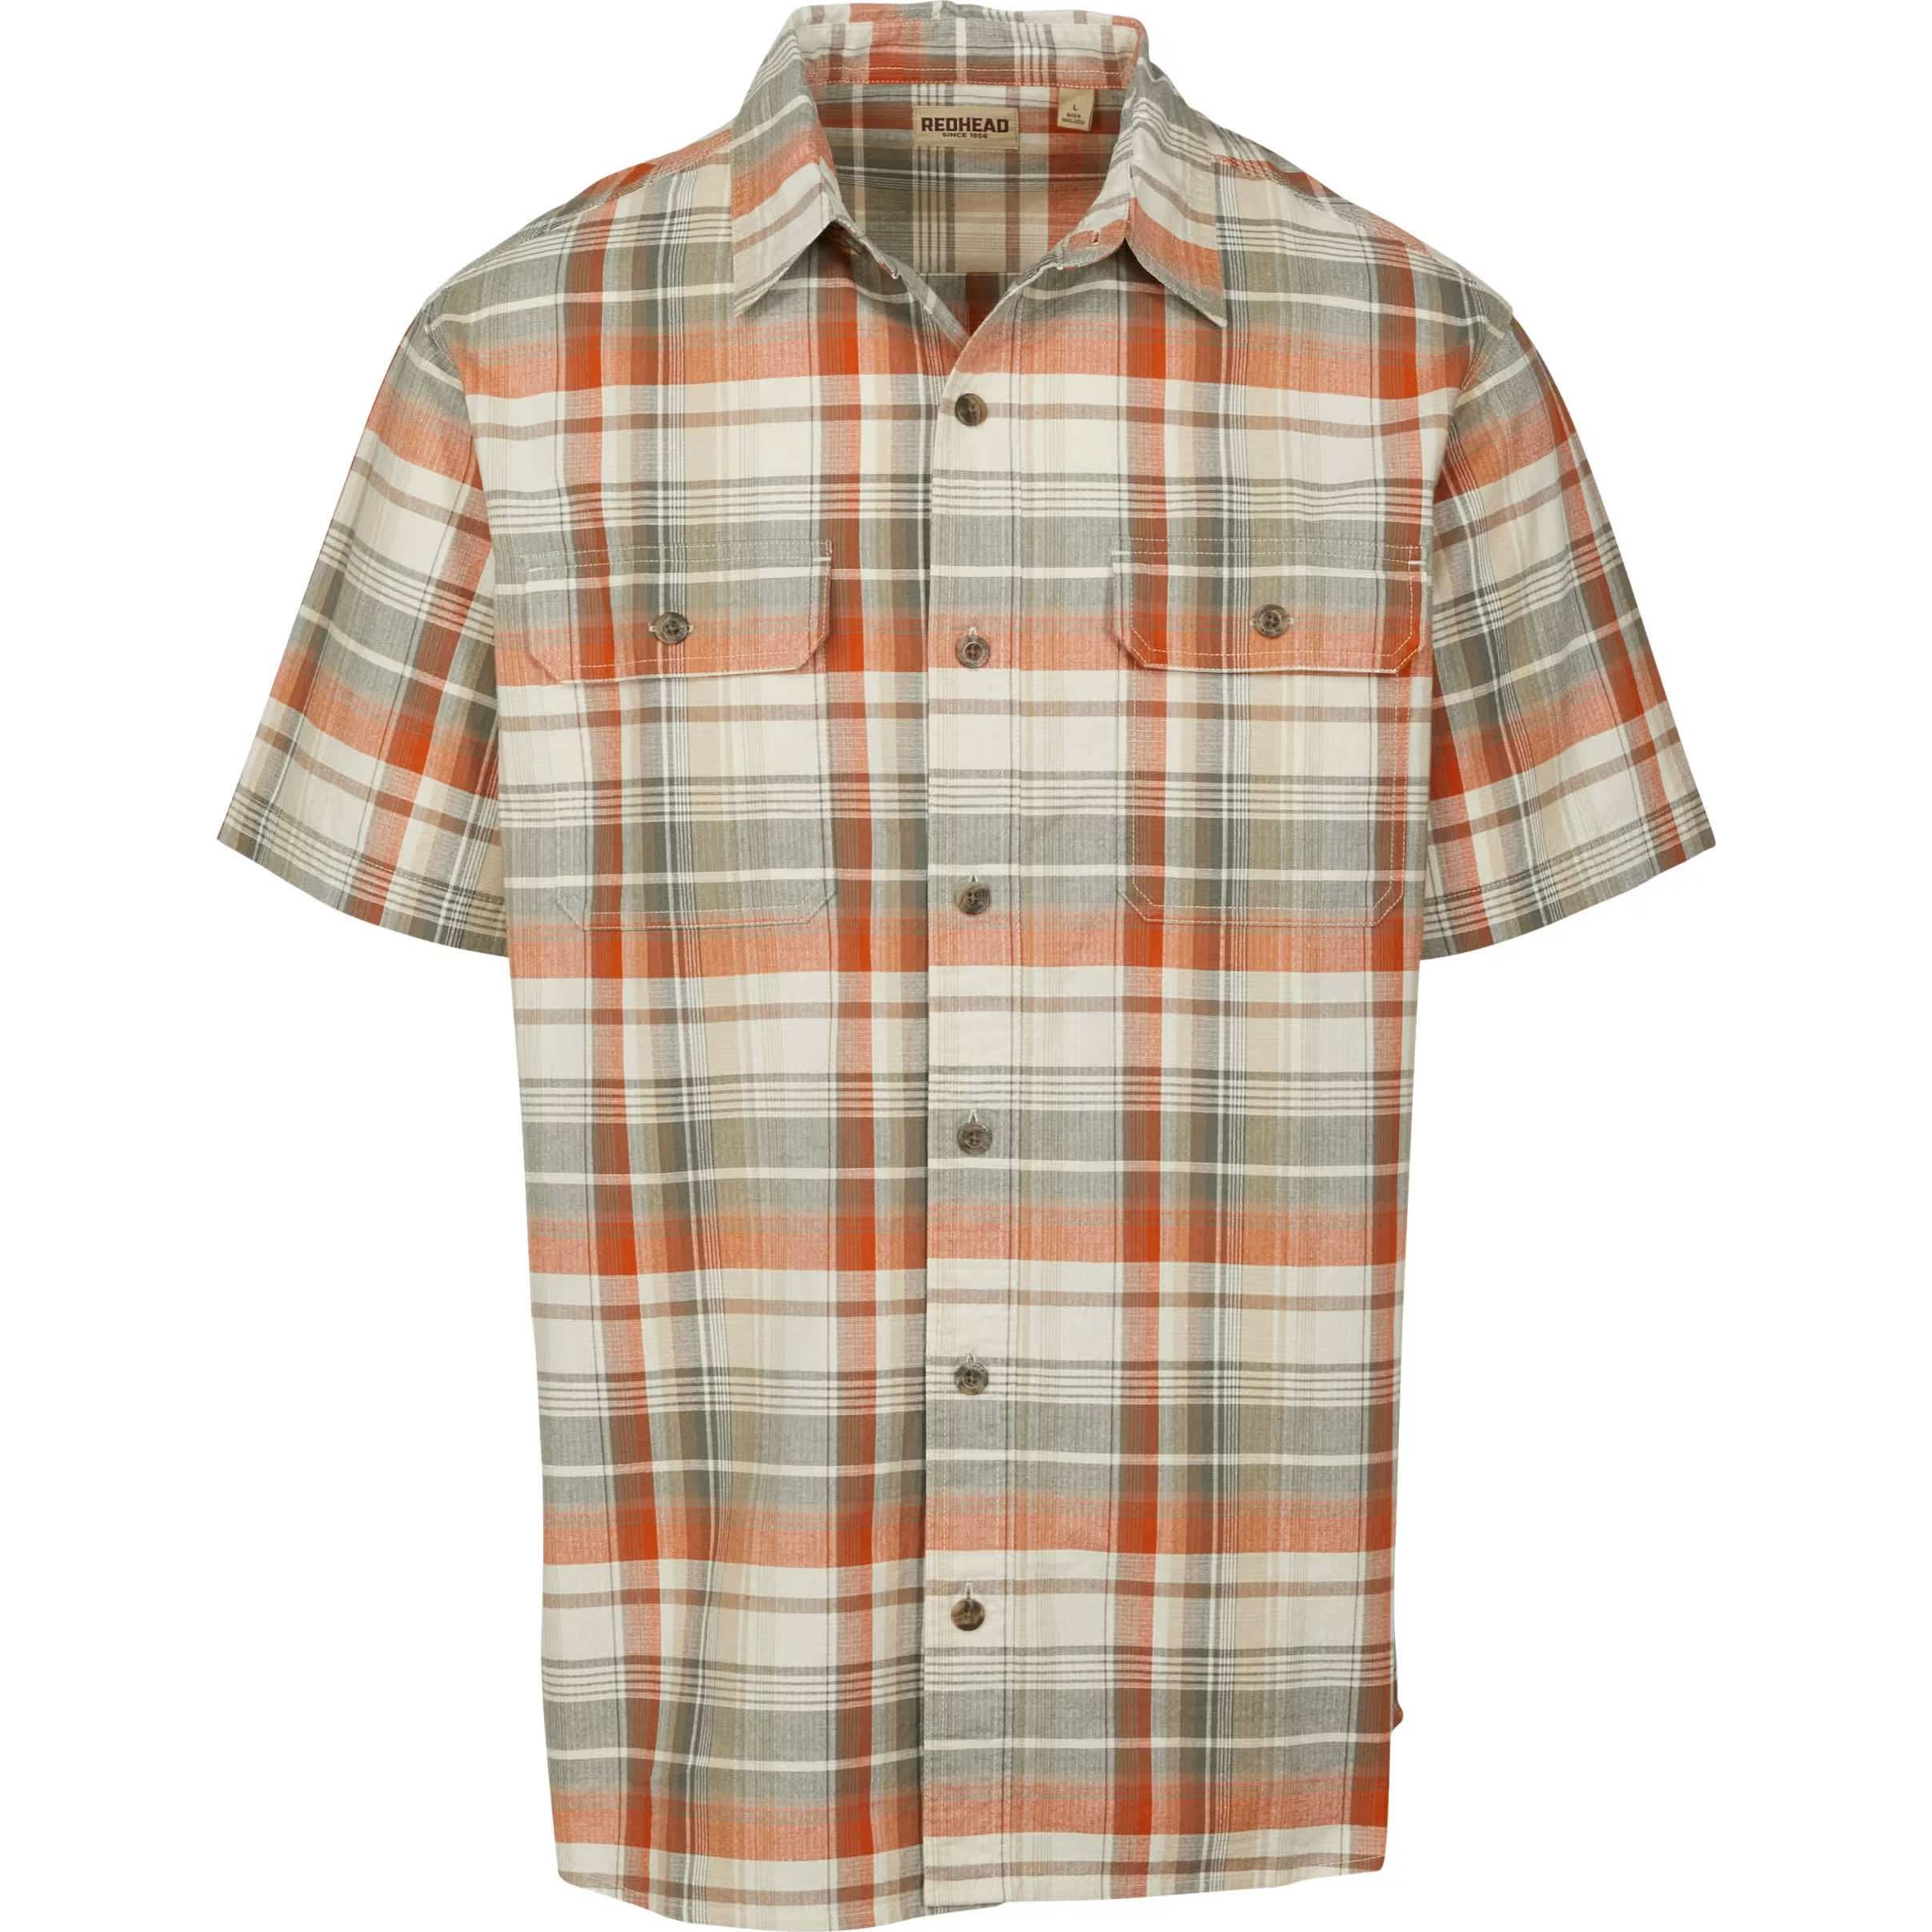 Clothing & Shoes - Tops - Shirts & Blouses - Cuddl Duds Flannel